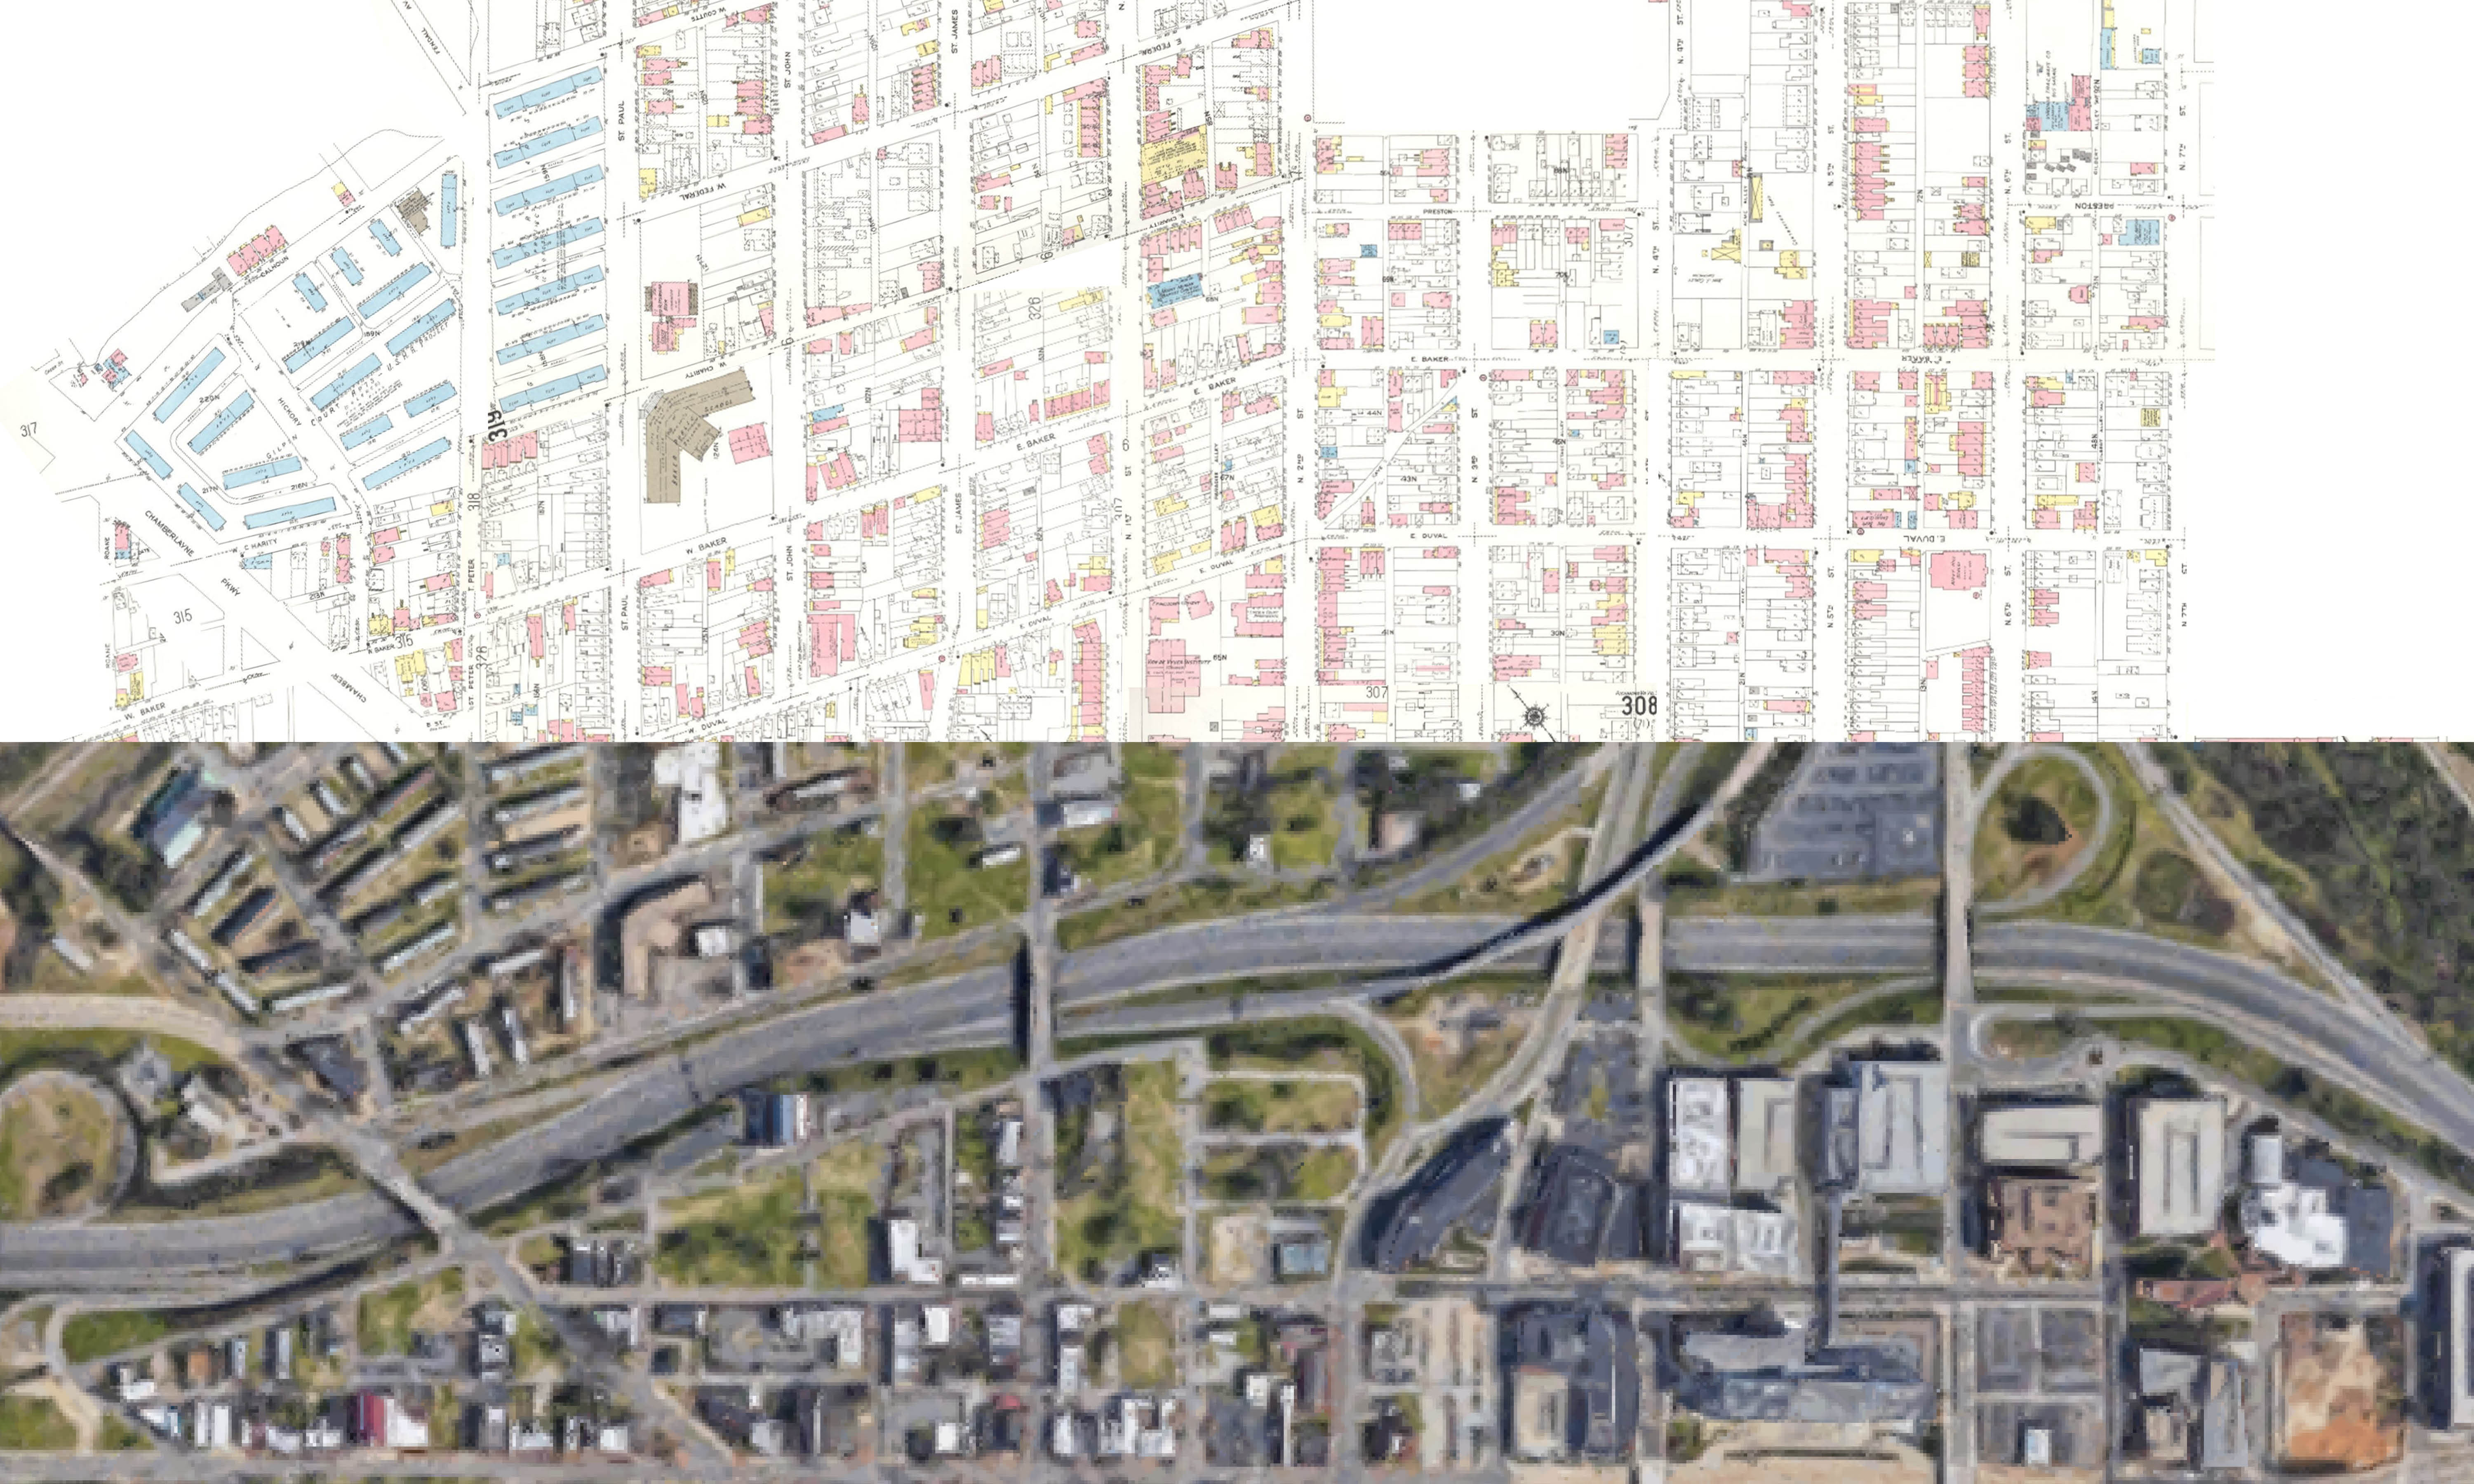 this image compares a land use map from before i95 was constructed showing a connected neighborhood, compare with an aerial of how the interstate now currently dissects that community. 